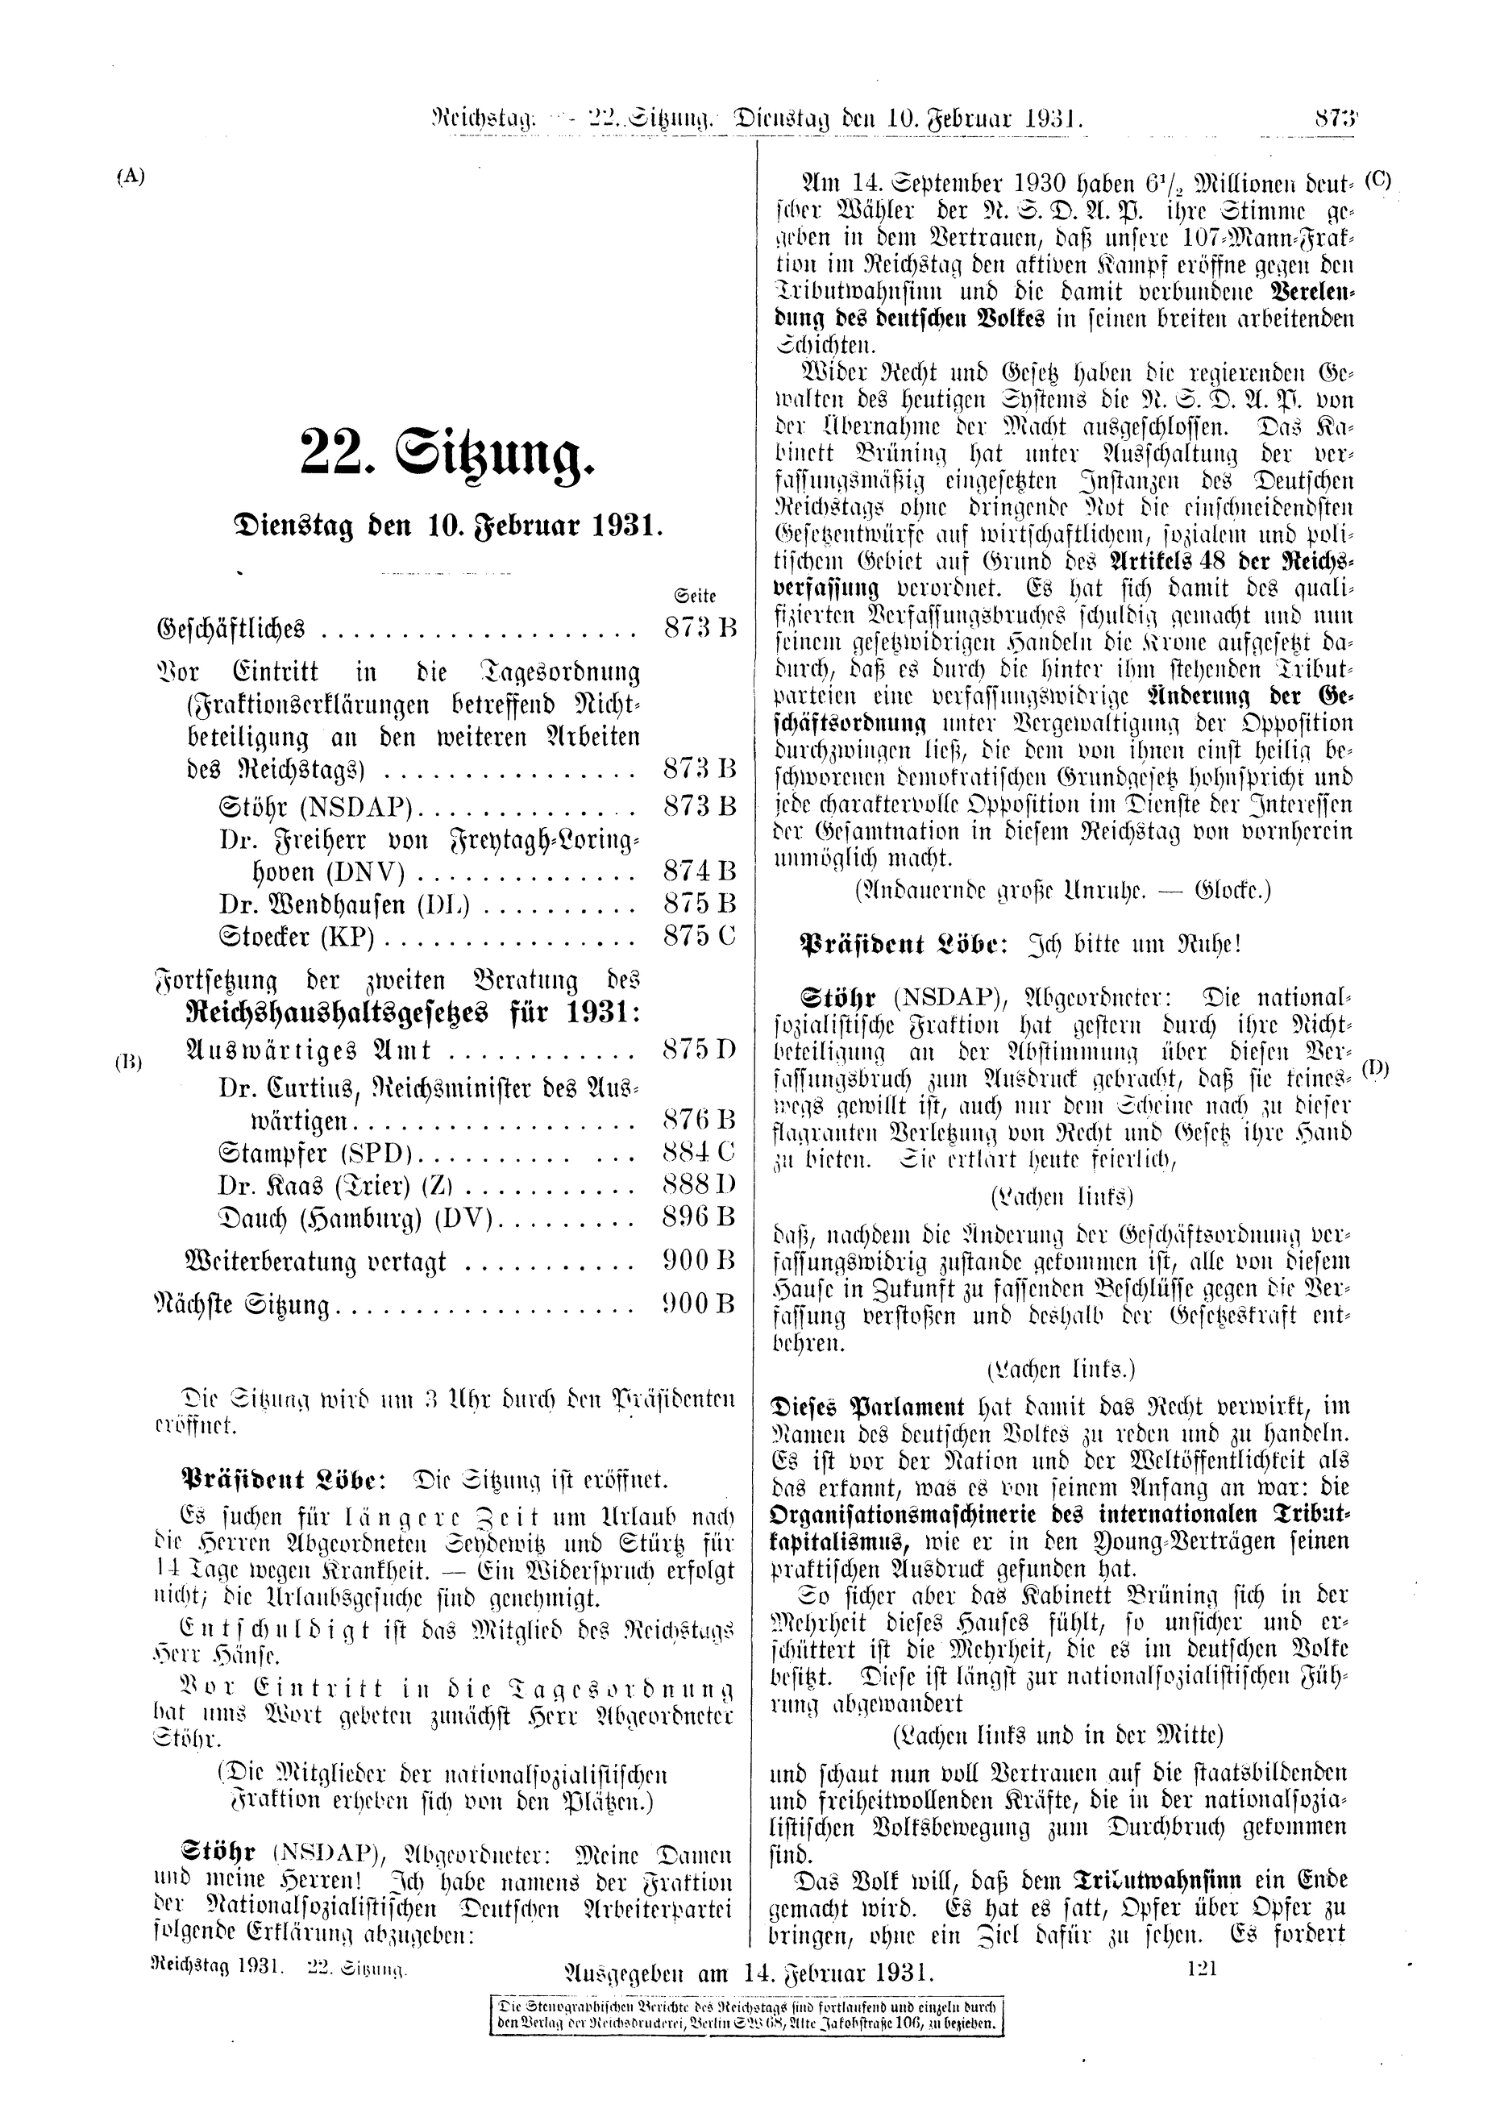 Scan of page 873